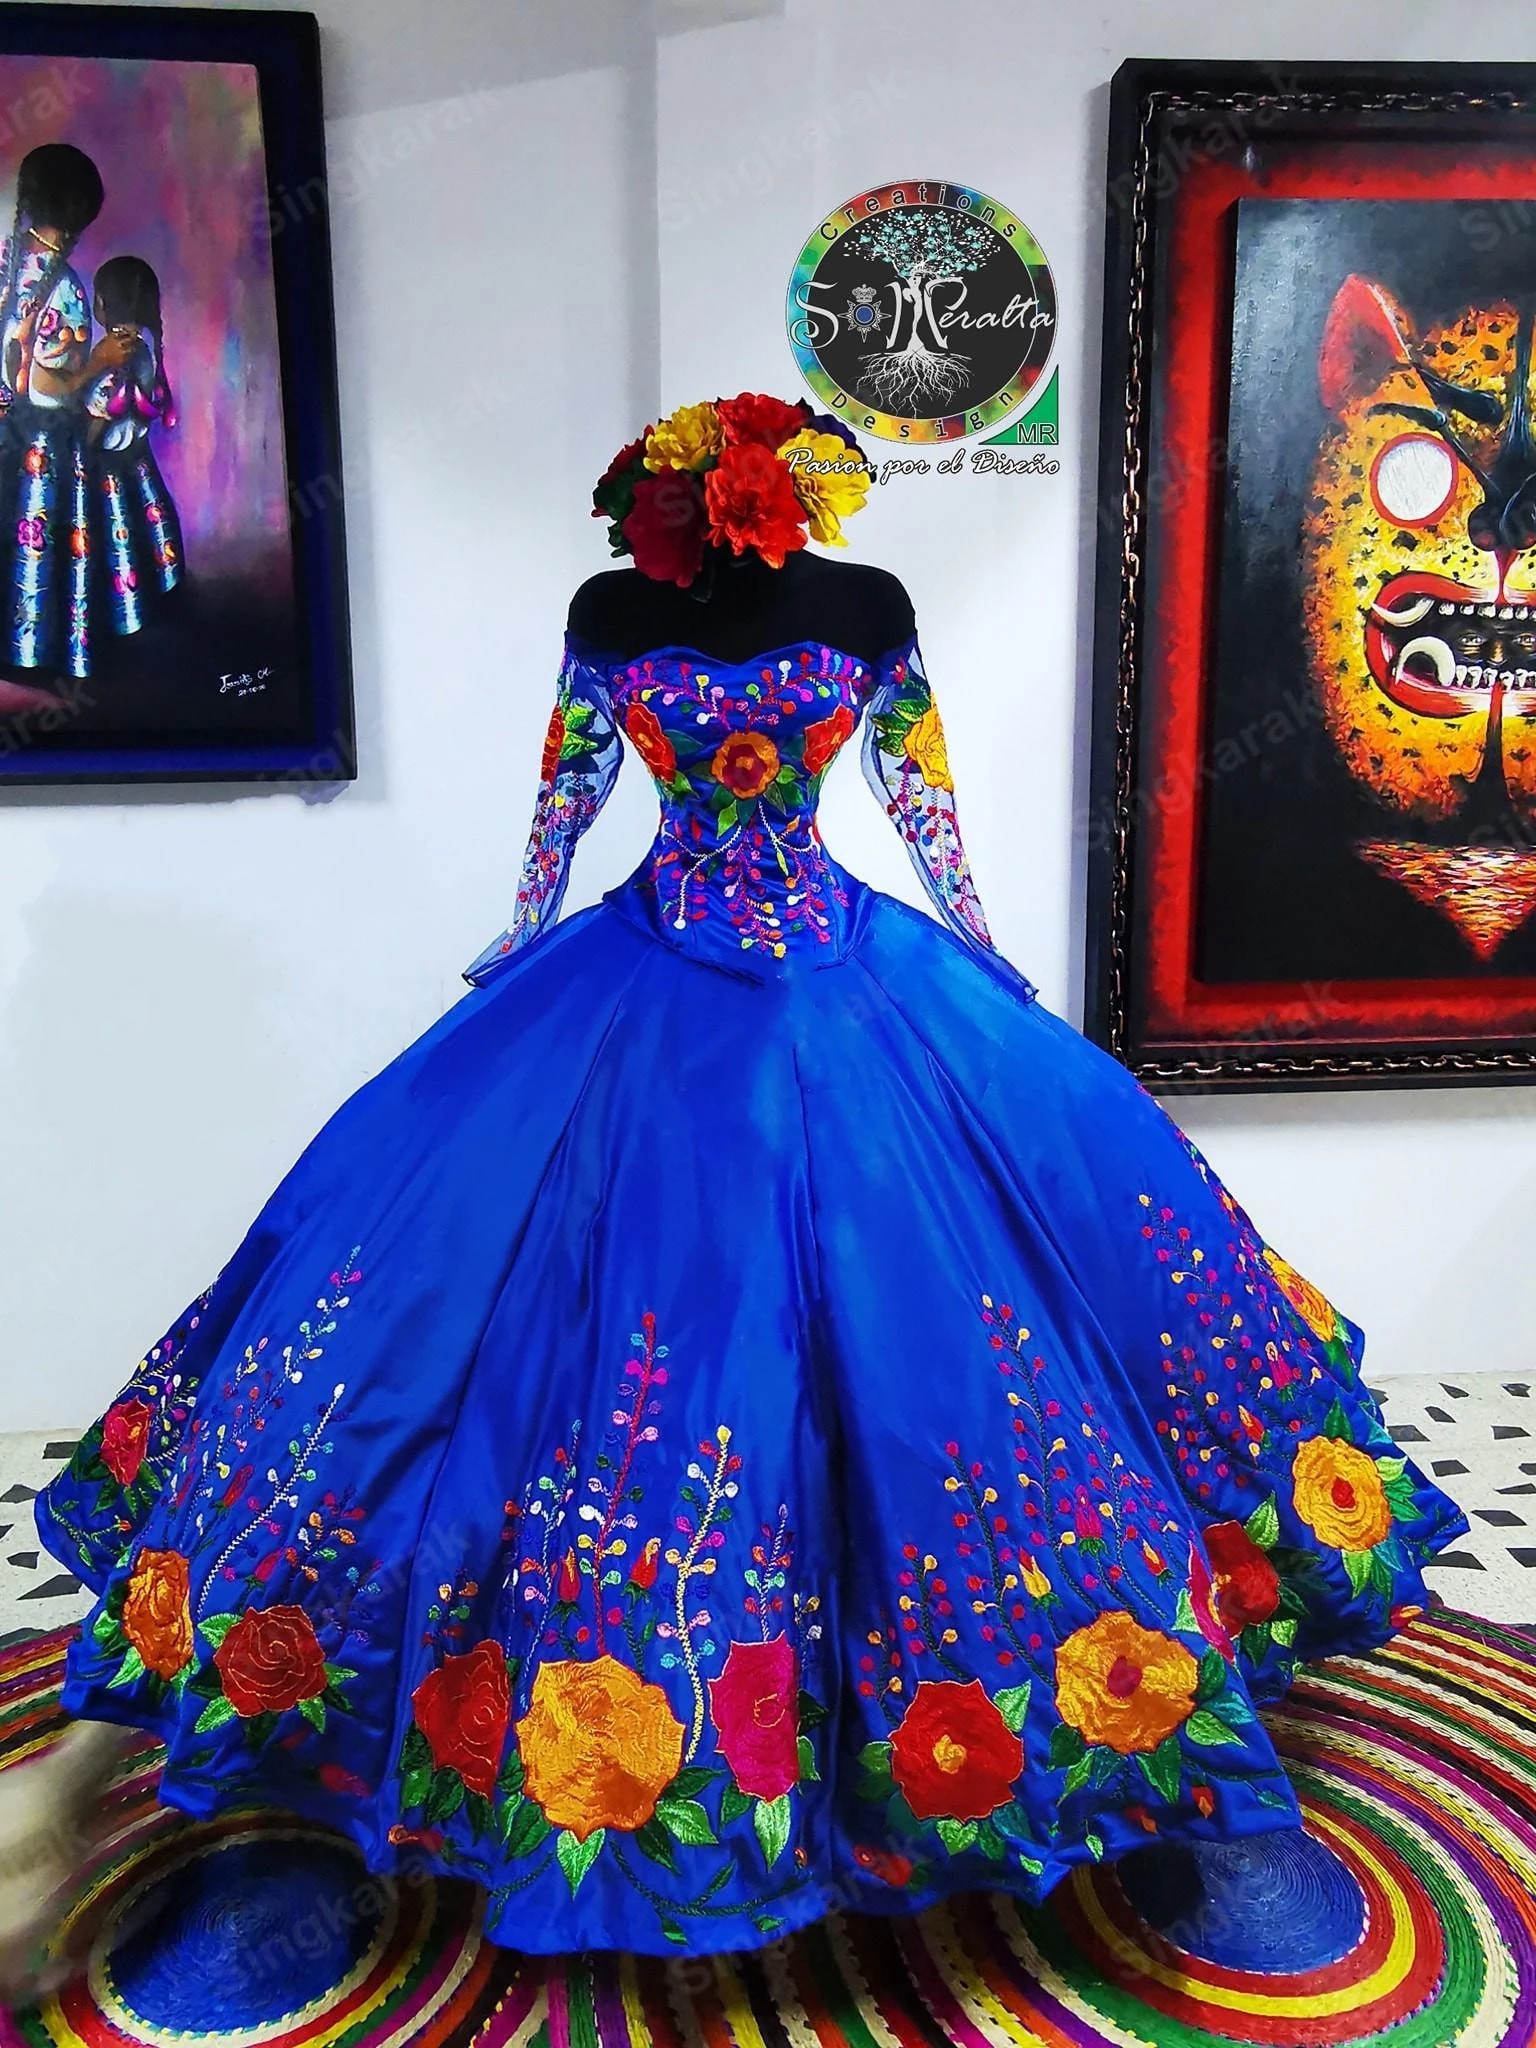 

2022 Fancy Royal Blue Quinceanera Dresses Ball Gown Long Illusion Sleeves Colorful Flowers Embroidered Satin XV Applique Vestido De 15 Anos Prom Evening Party Dress, Champagne